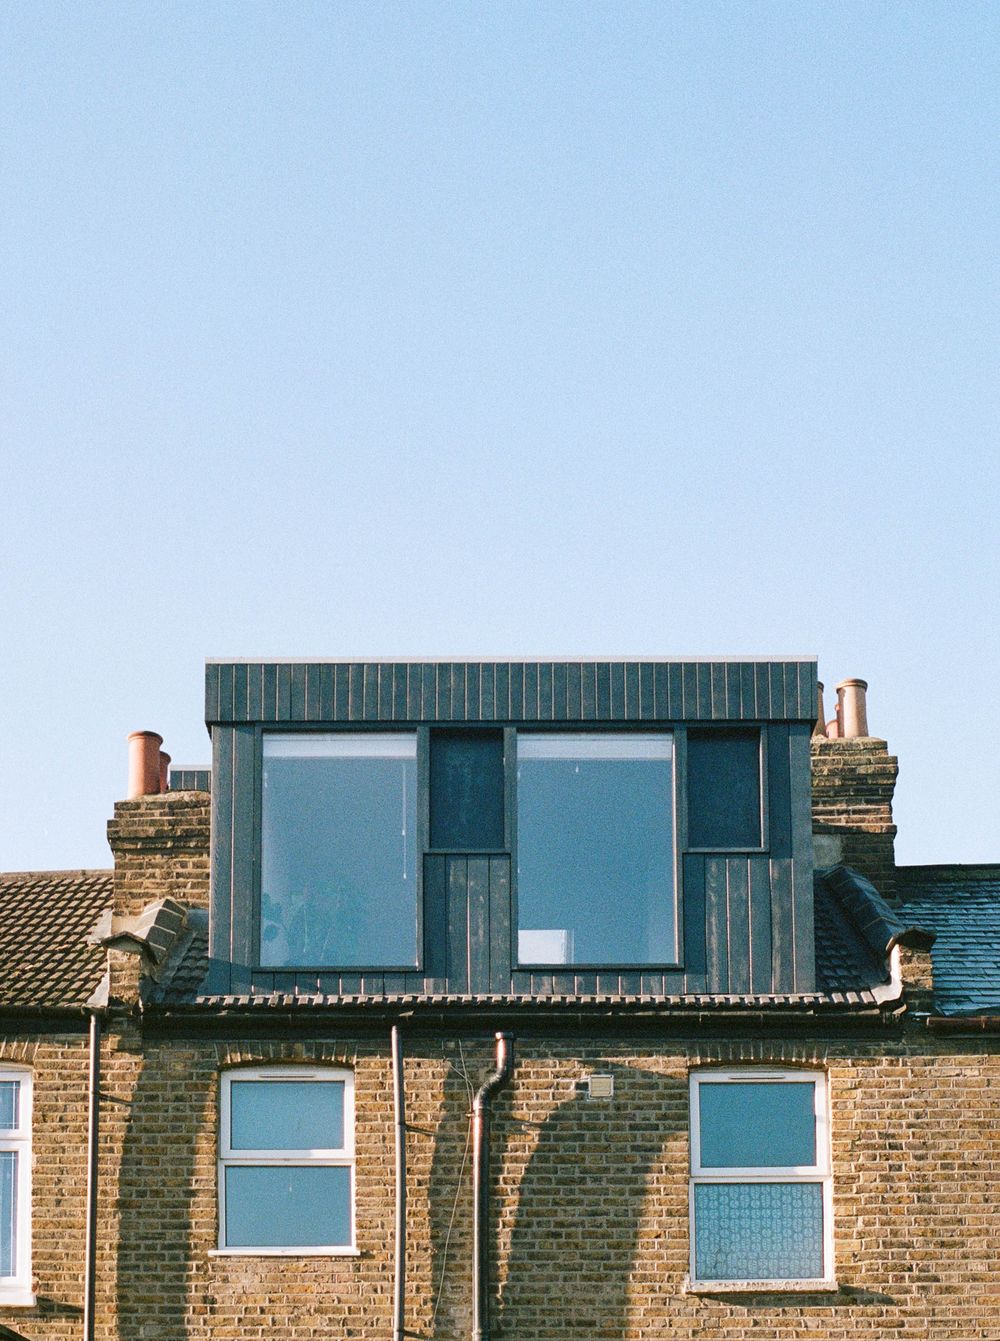 External view of From Works' vertical timber clad rear dormer extension in East London.